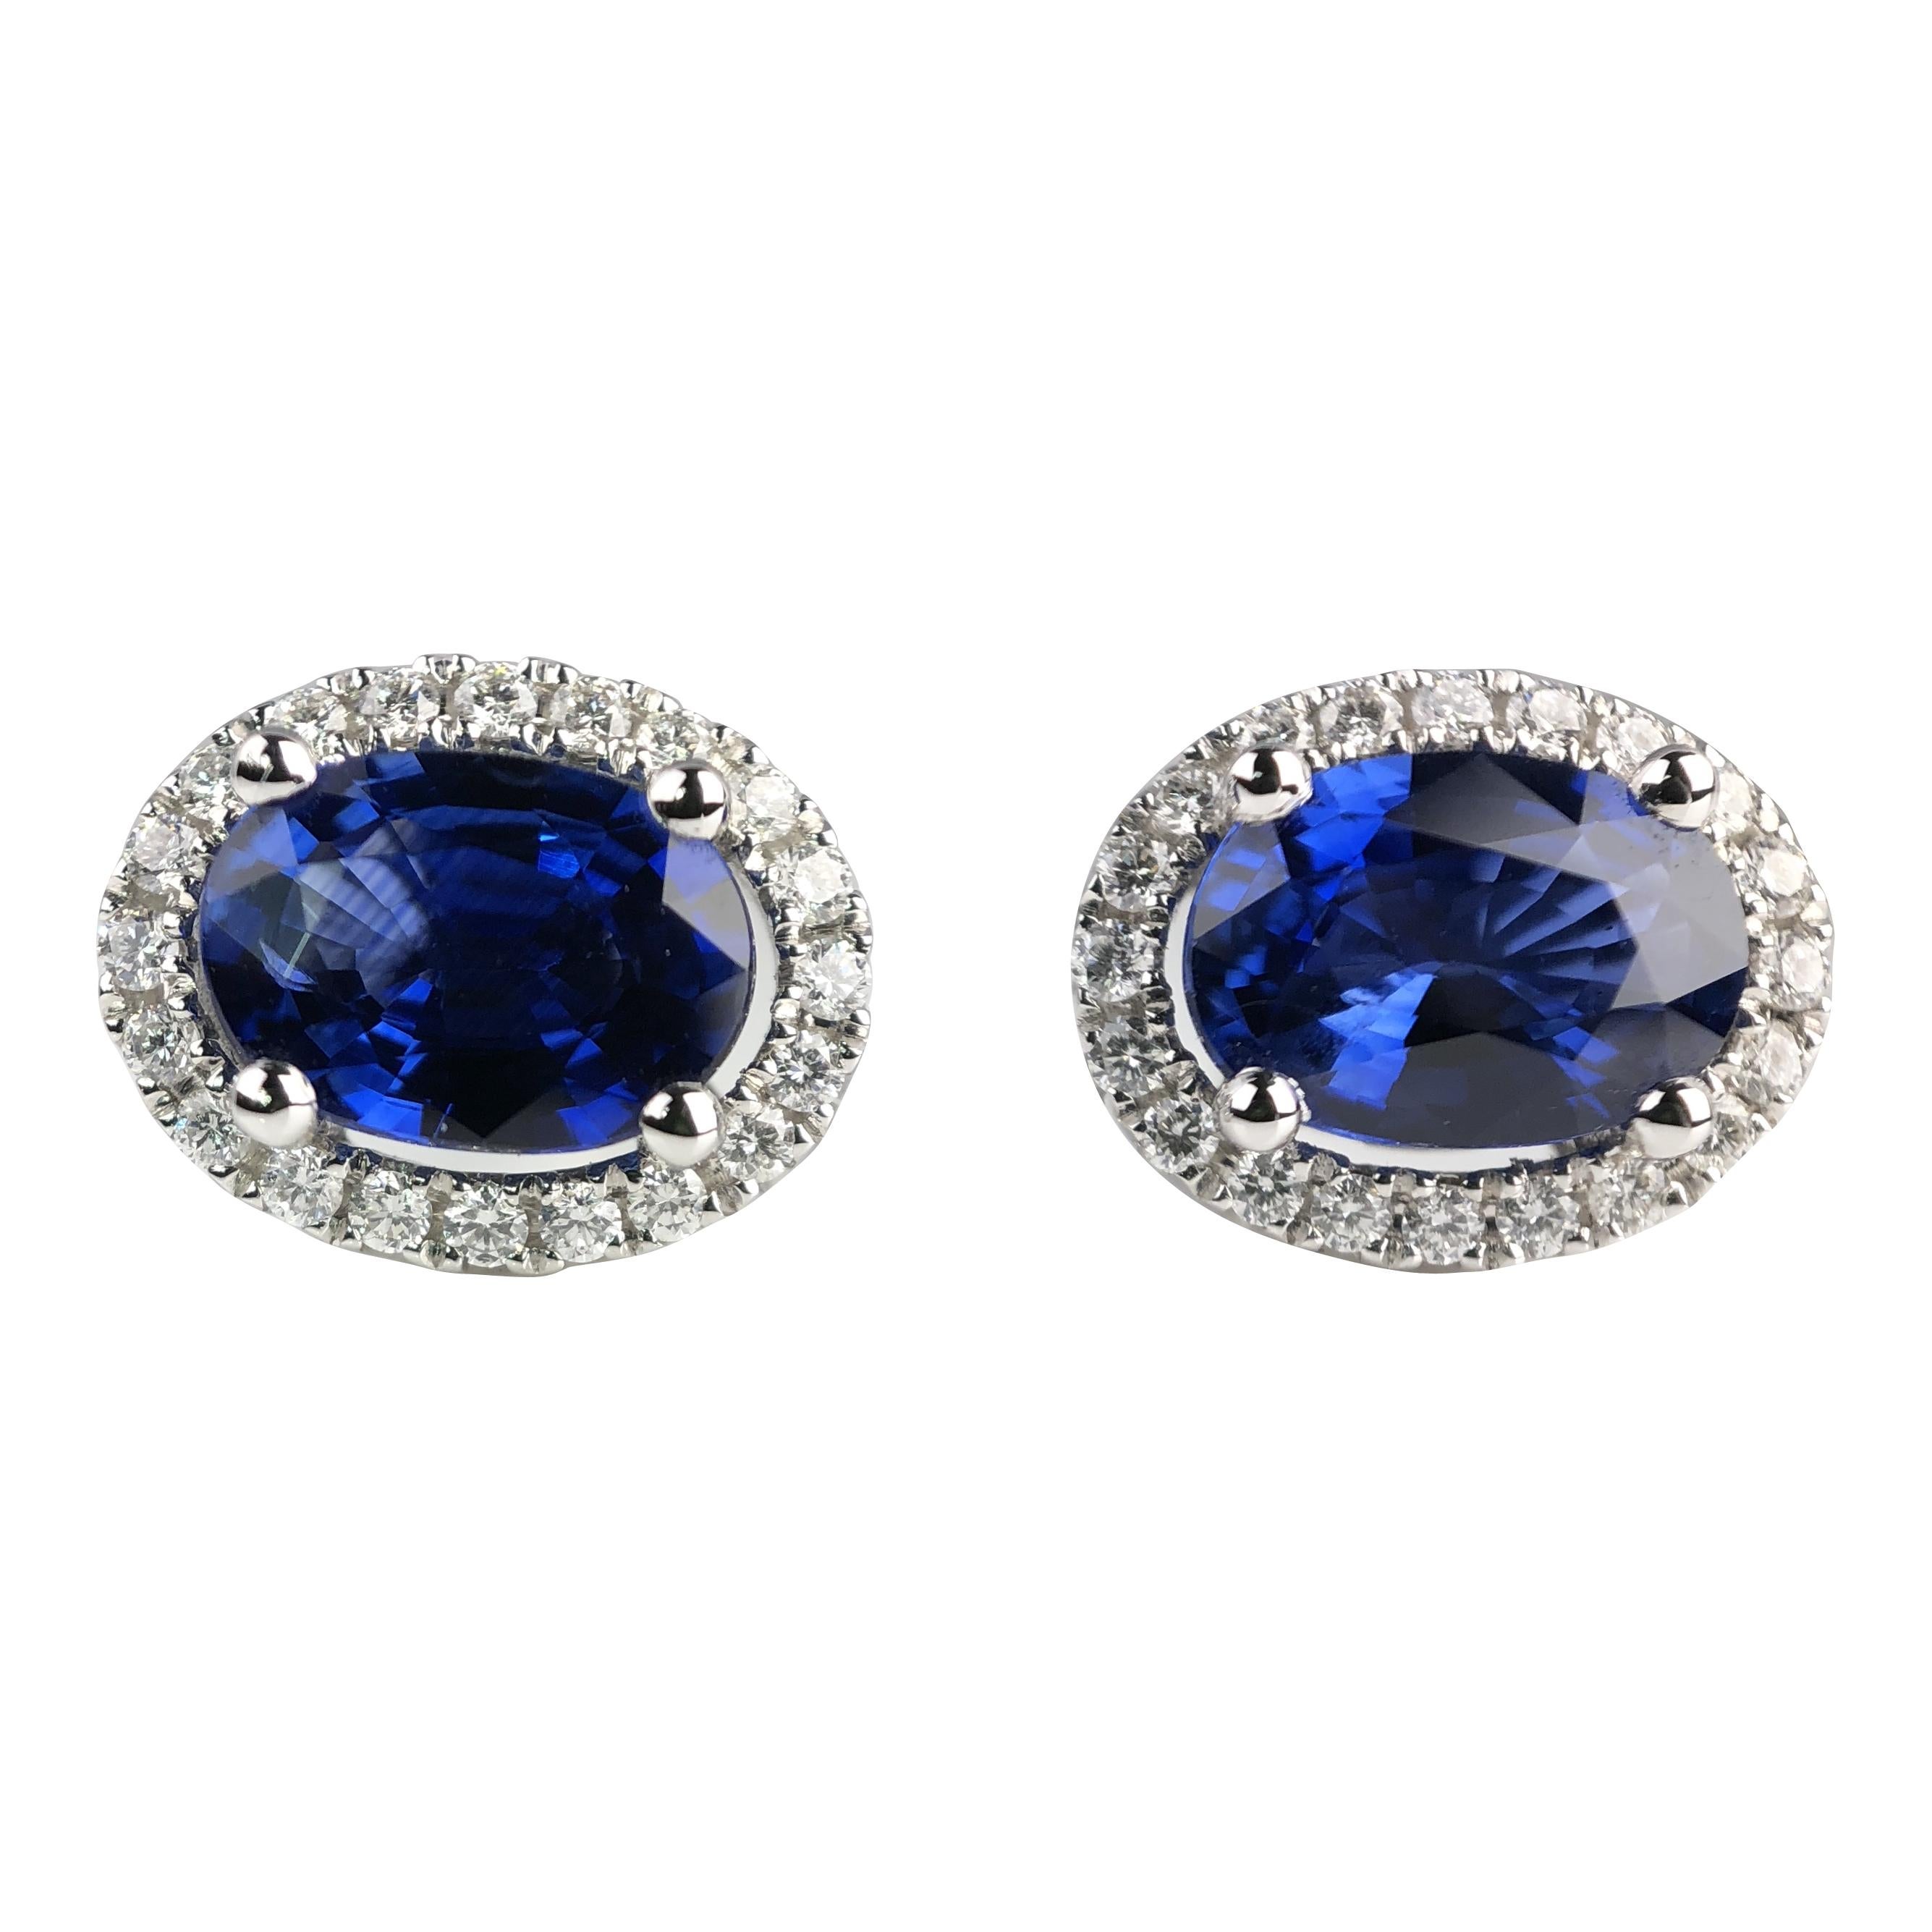 1.65 Carat Oval Cut Blue Sapphire Earrings with Diamond Halo in 18k White Gold